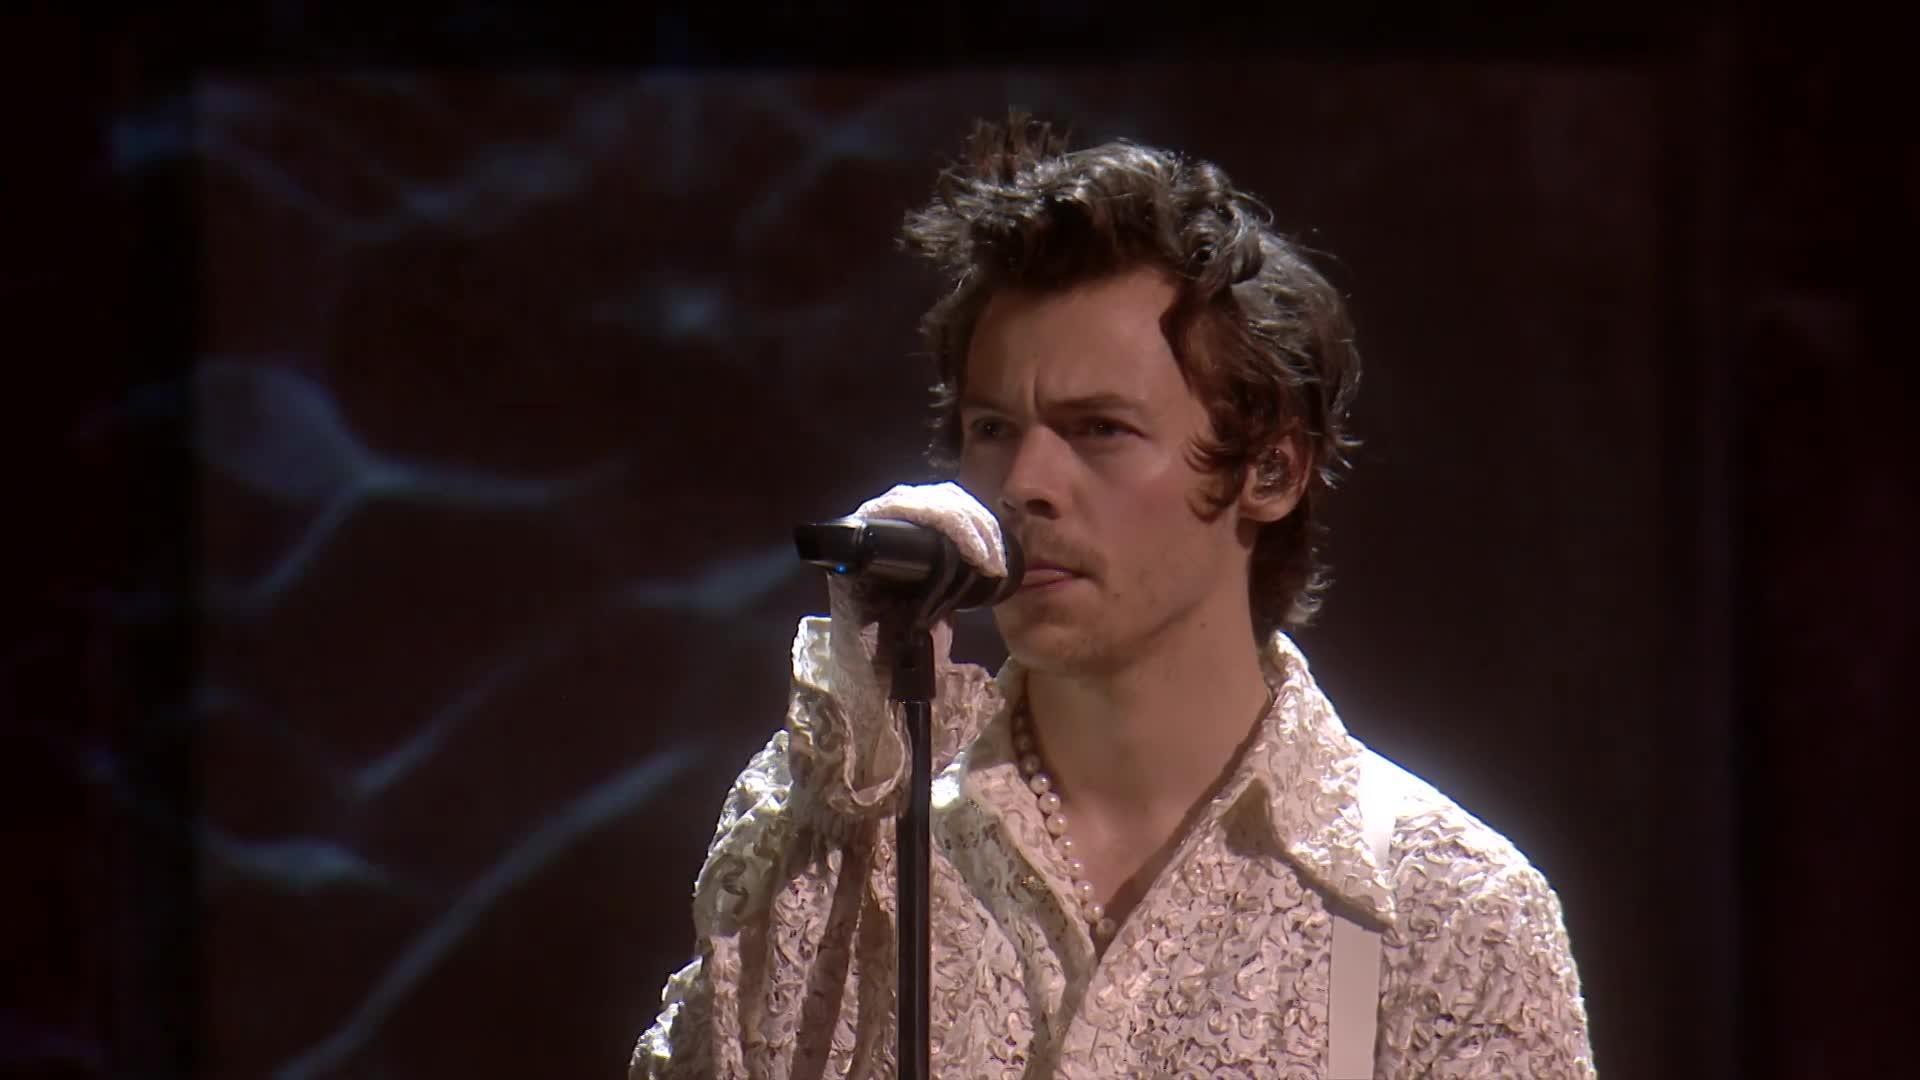 Harry Styles - Falling (Live At The Brit Awards 2020)